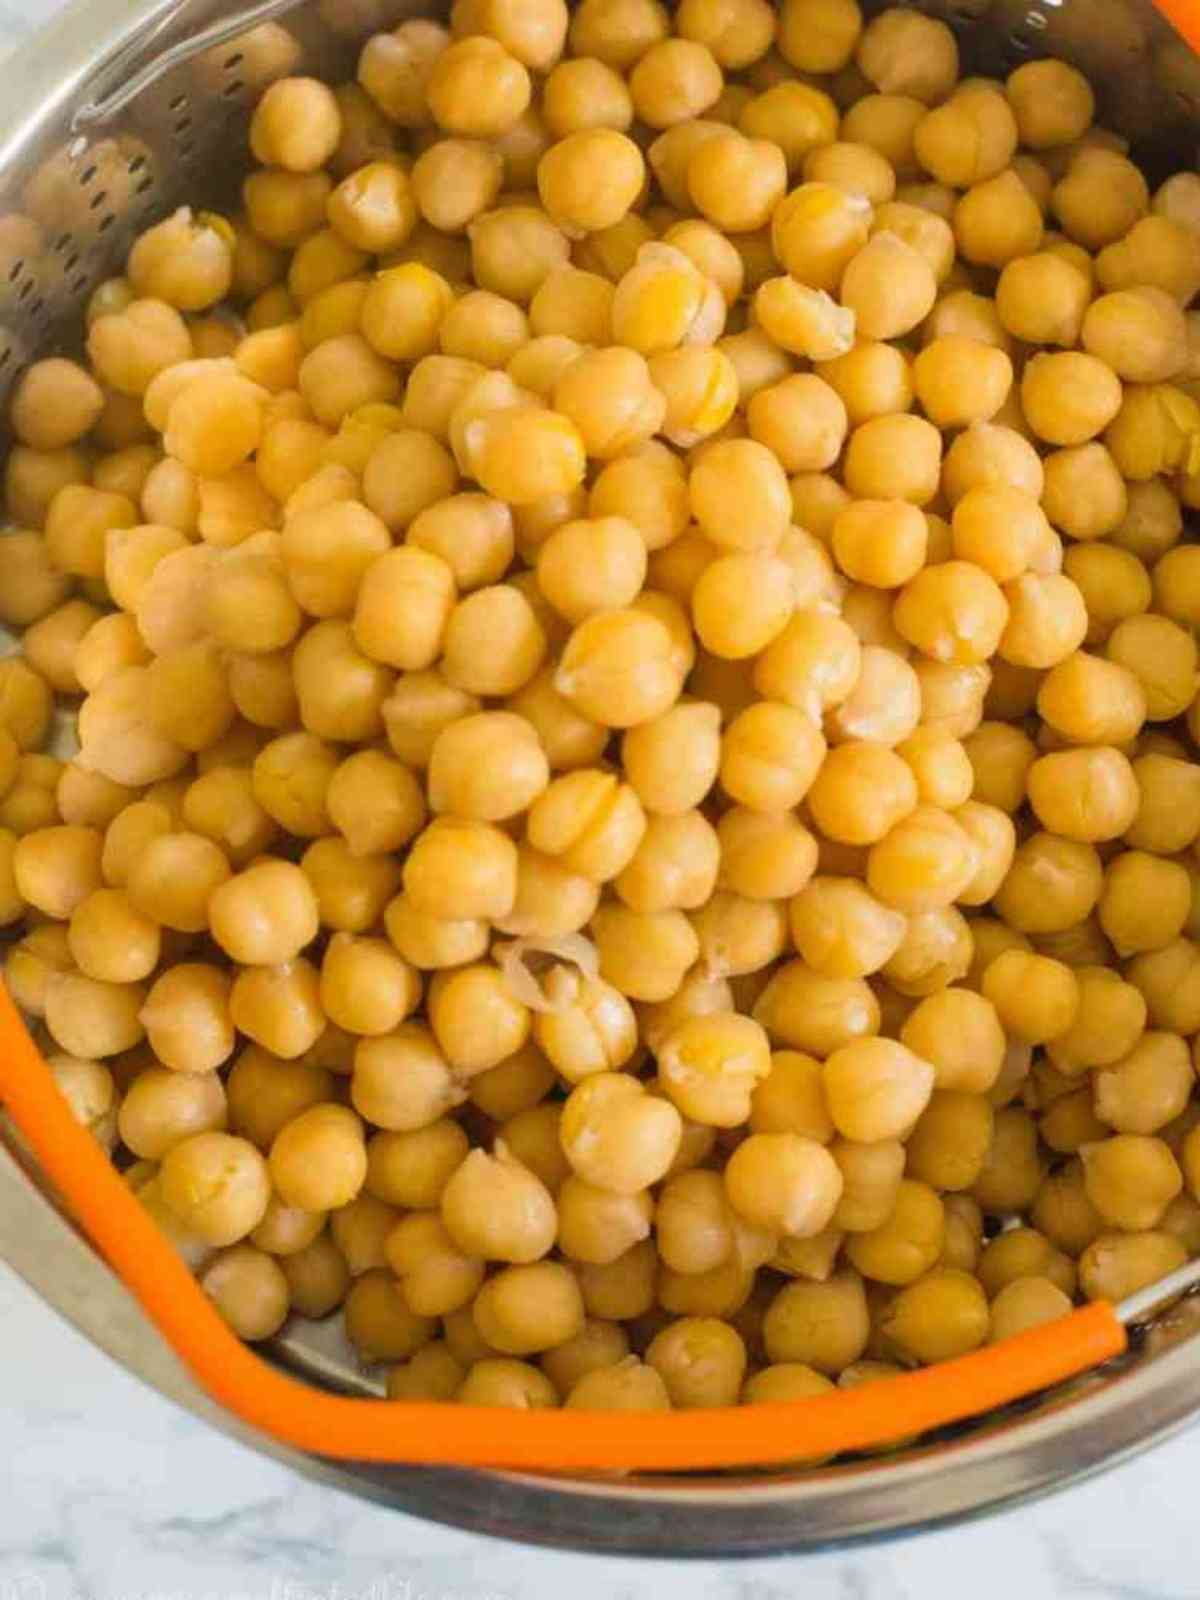 Cooked chickpeas in a colander